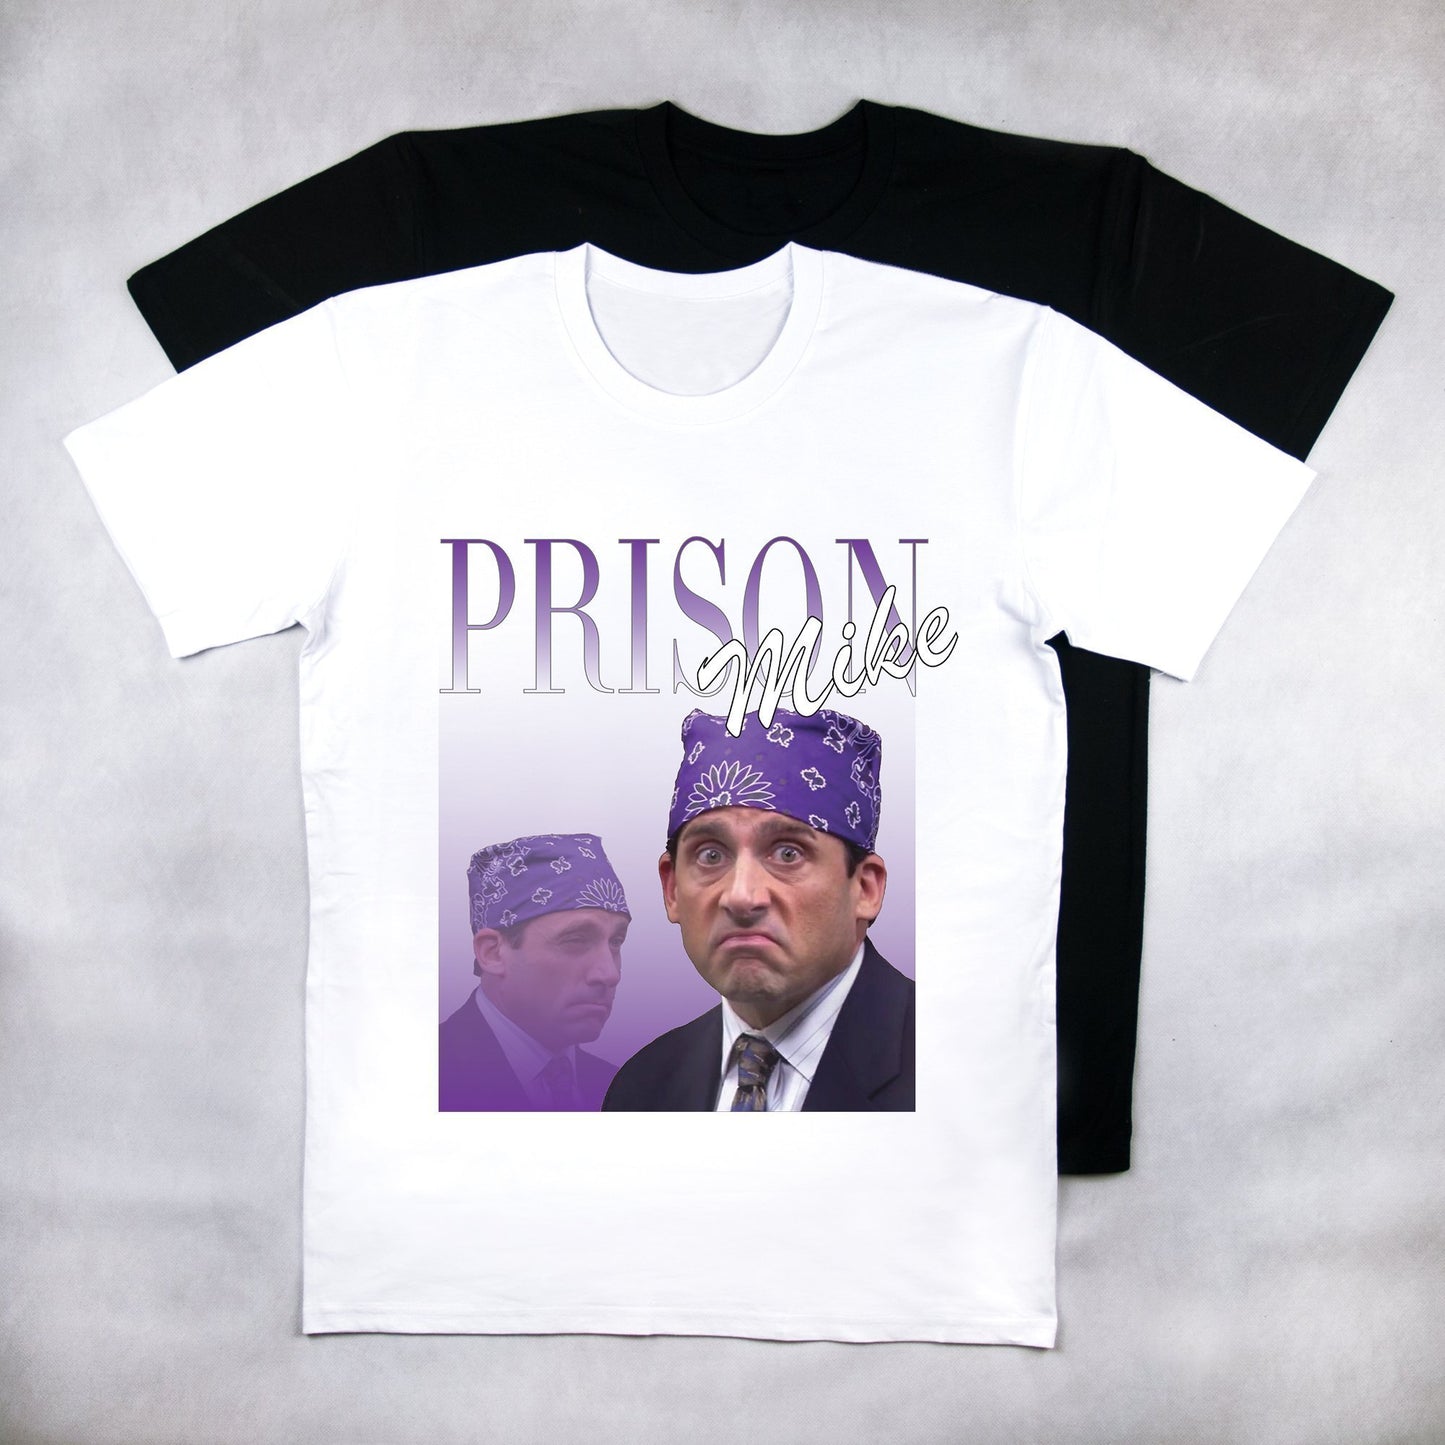 Classy Duds Short Sleeve T-Shirts S / Black / Standard Prison Mike Commemorative Classic Tee